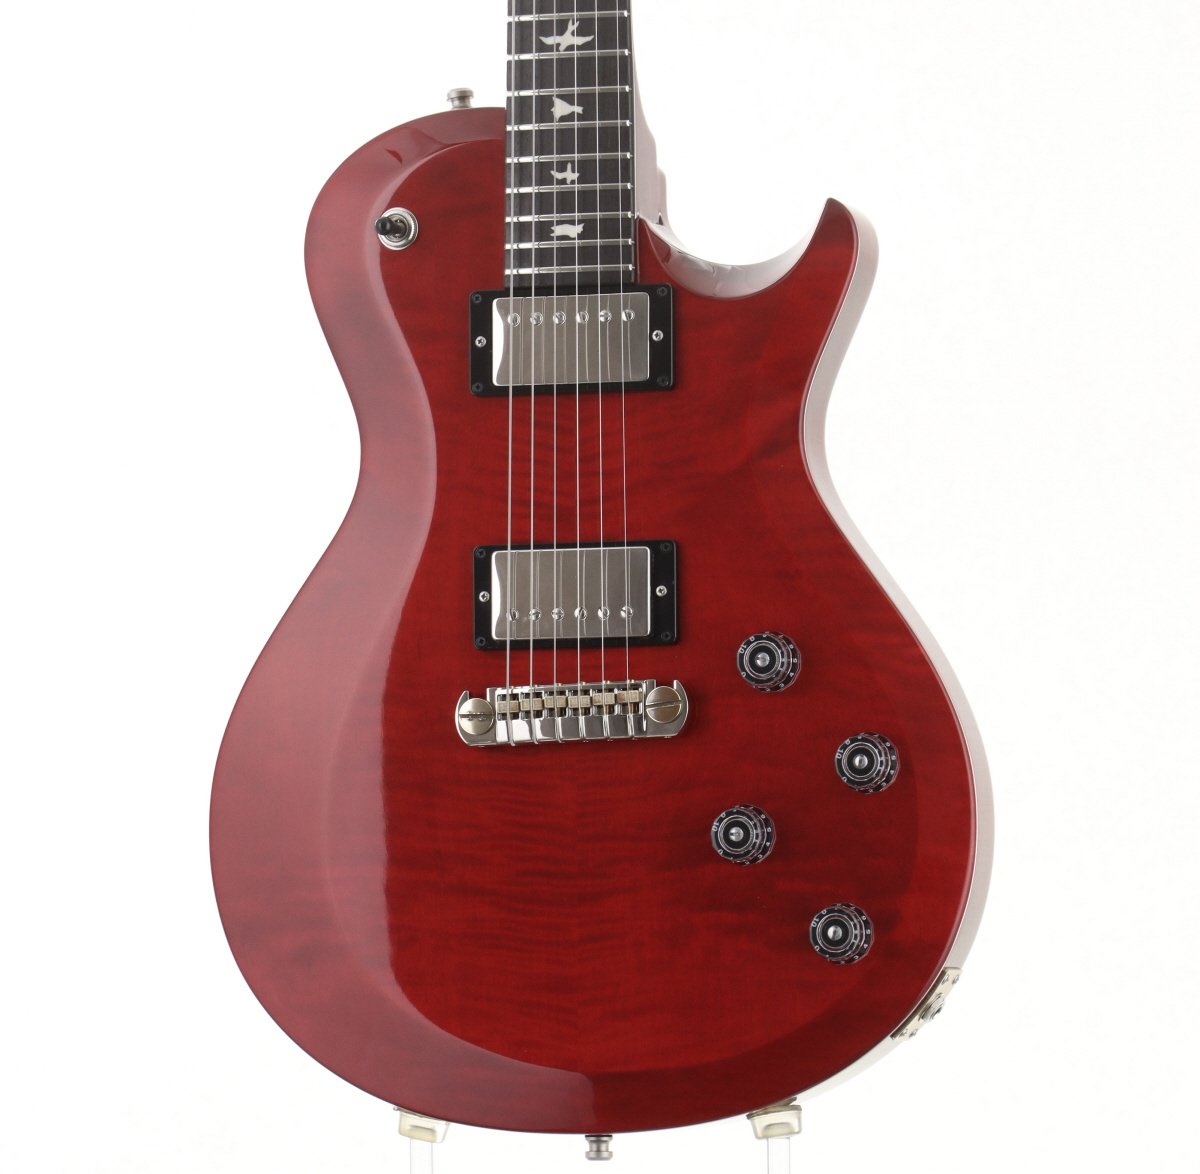 [SN 18 S2030190] USED Paul Reed Smith (PRS) / S2 Singlecut Scarlet Red [03]